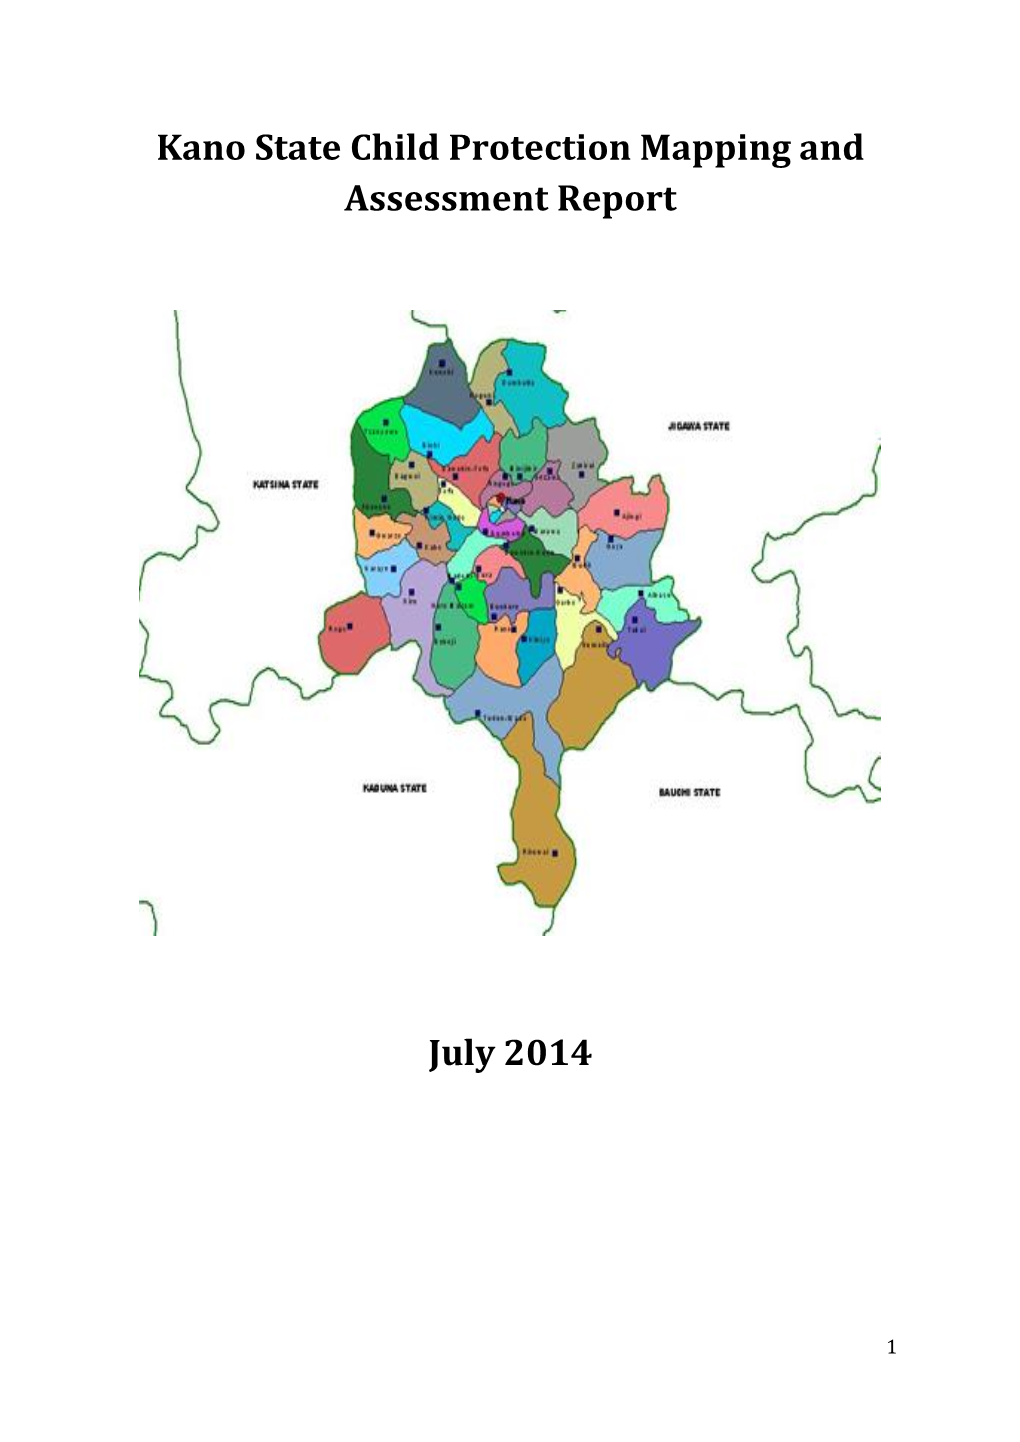 Kano State Child Protection Mapping and Assessment Report July 2014